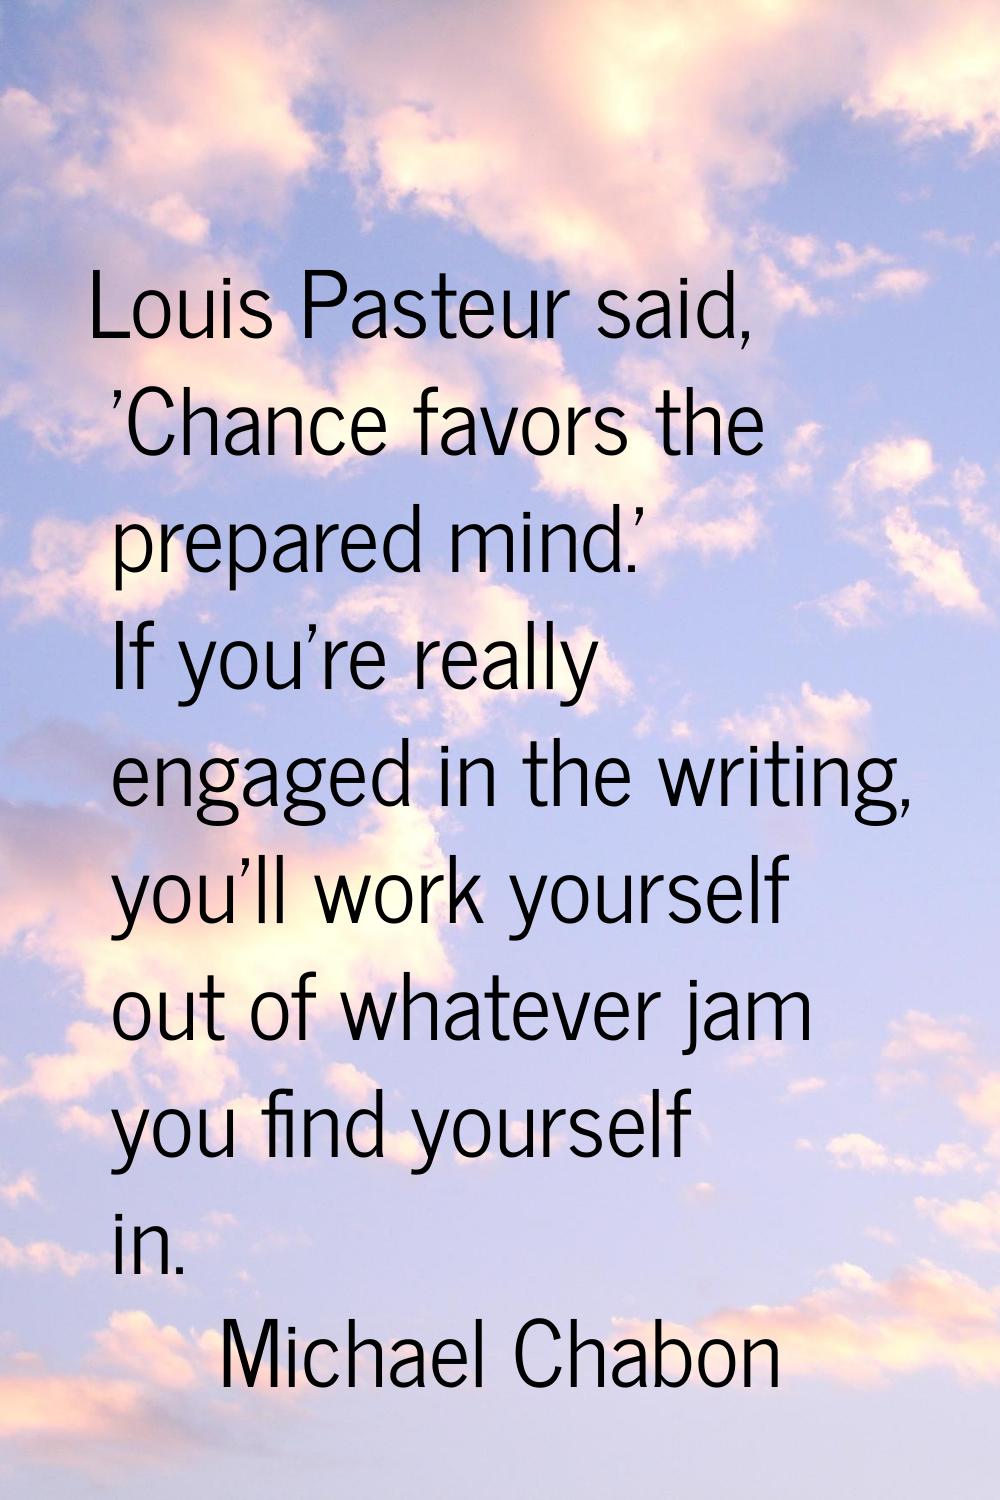 Louis Pasteur said, 'Chance favors the prepared mind.' If you're really engaged in the writing, you